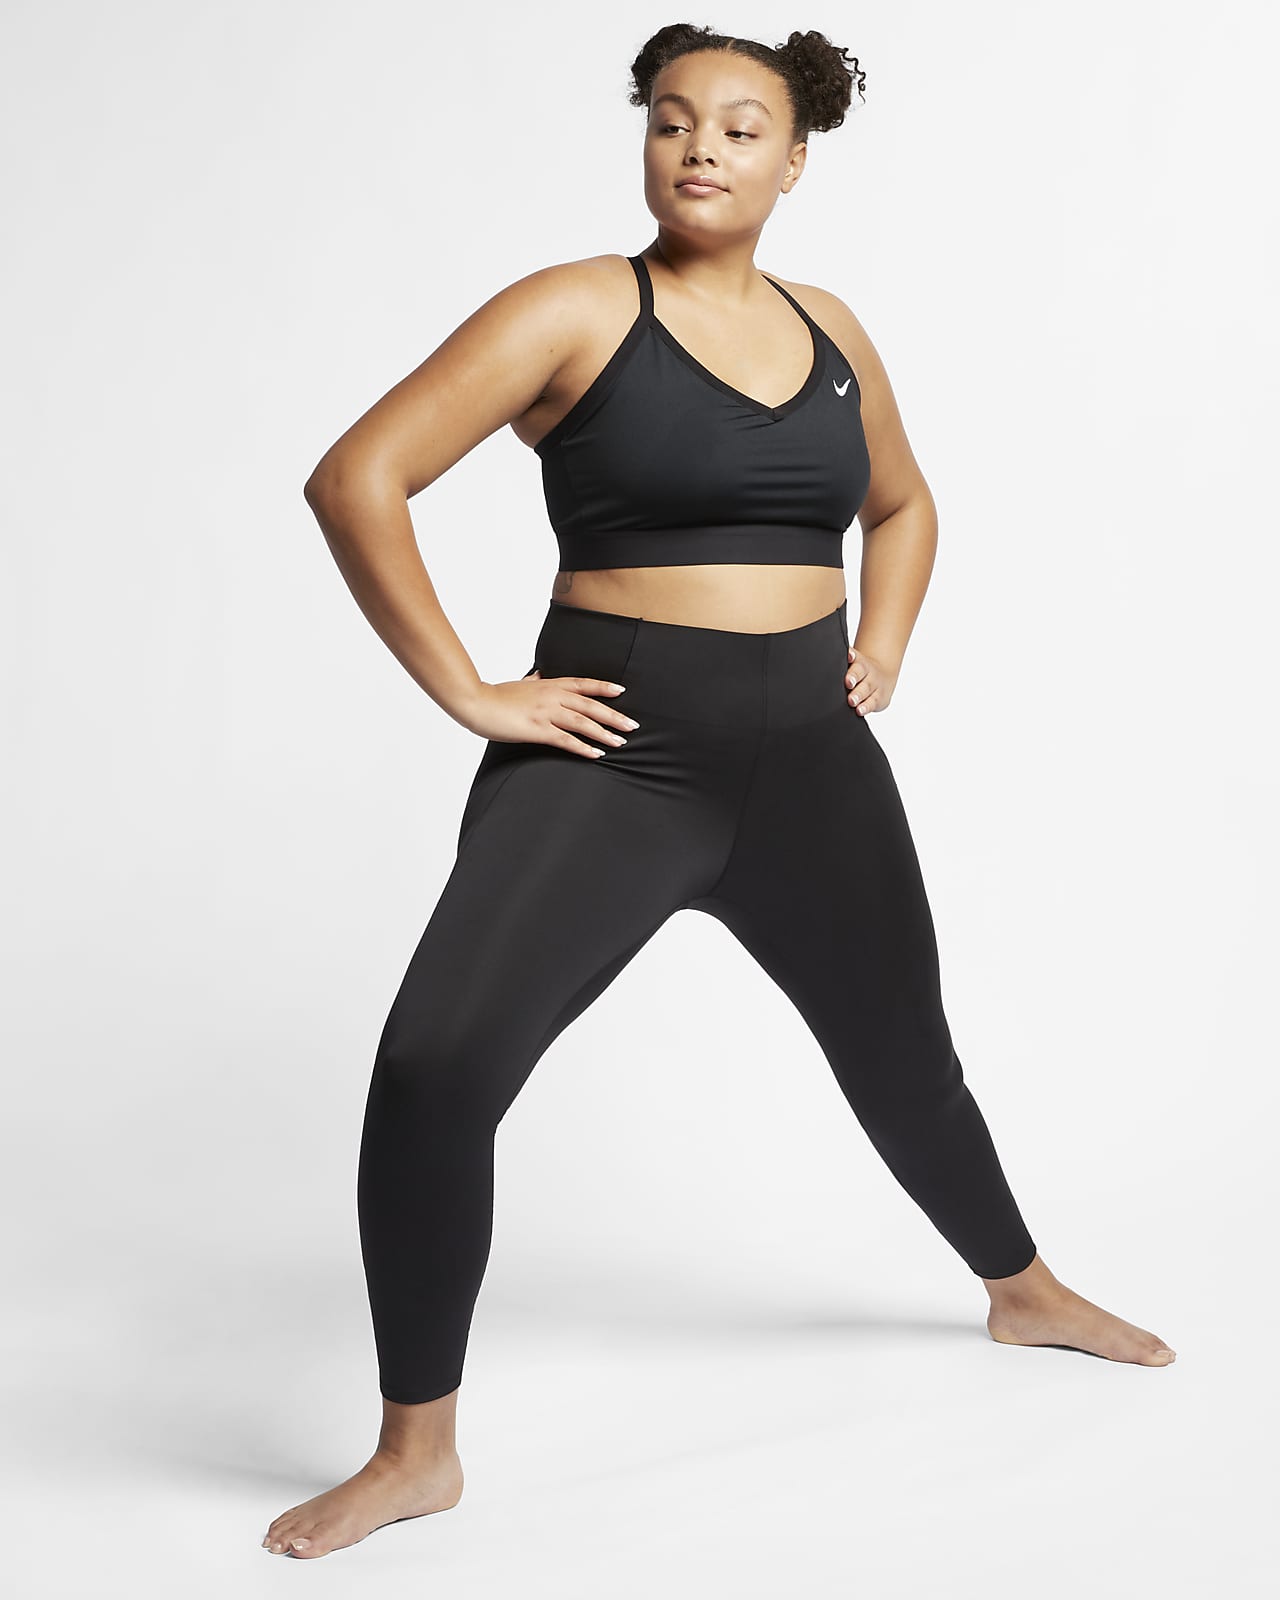 The Best Plus-Size Sports Bras From Nike. Nike HR